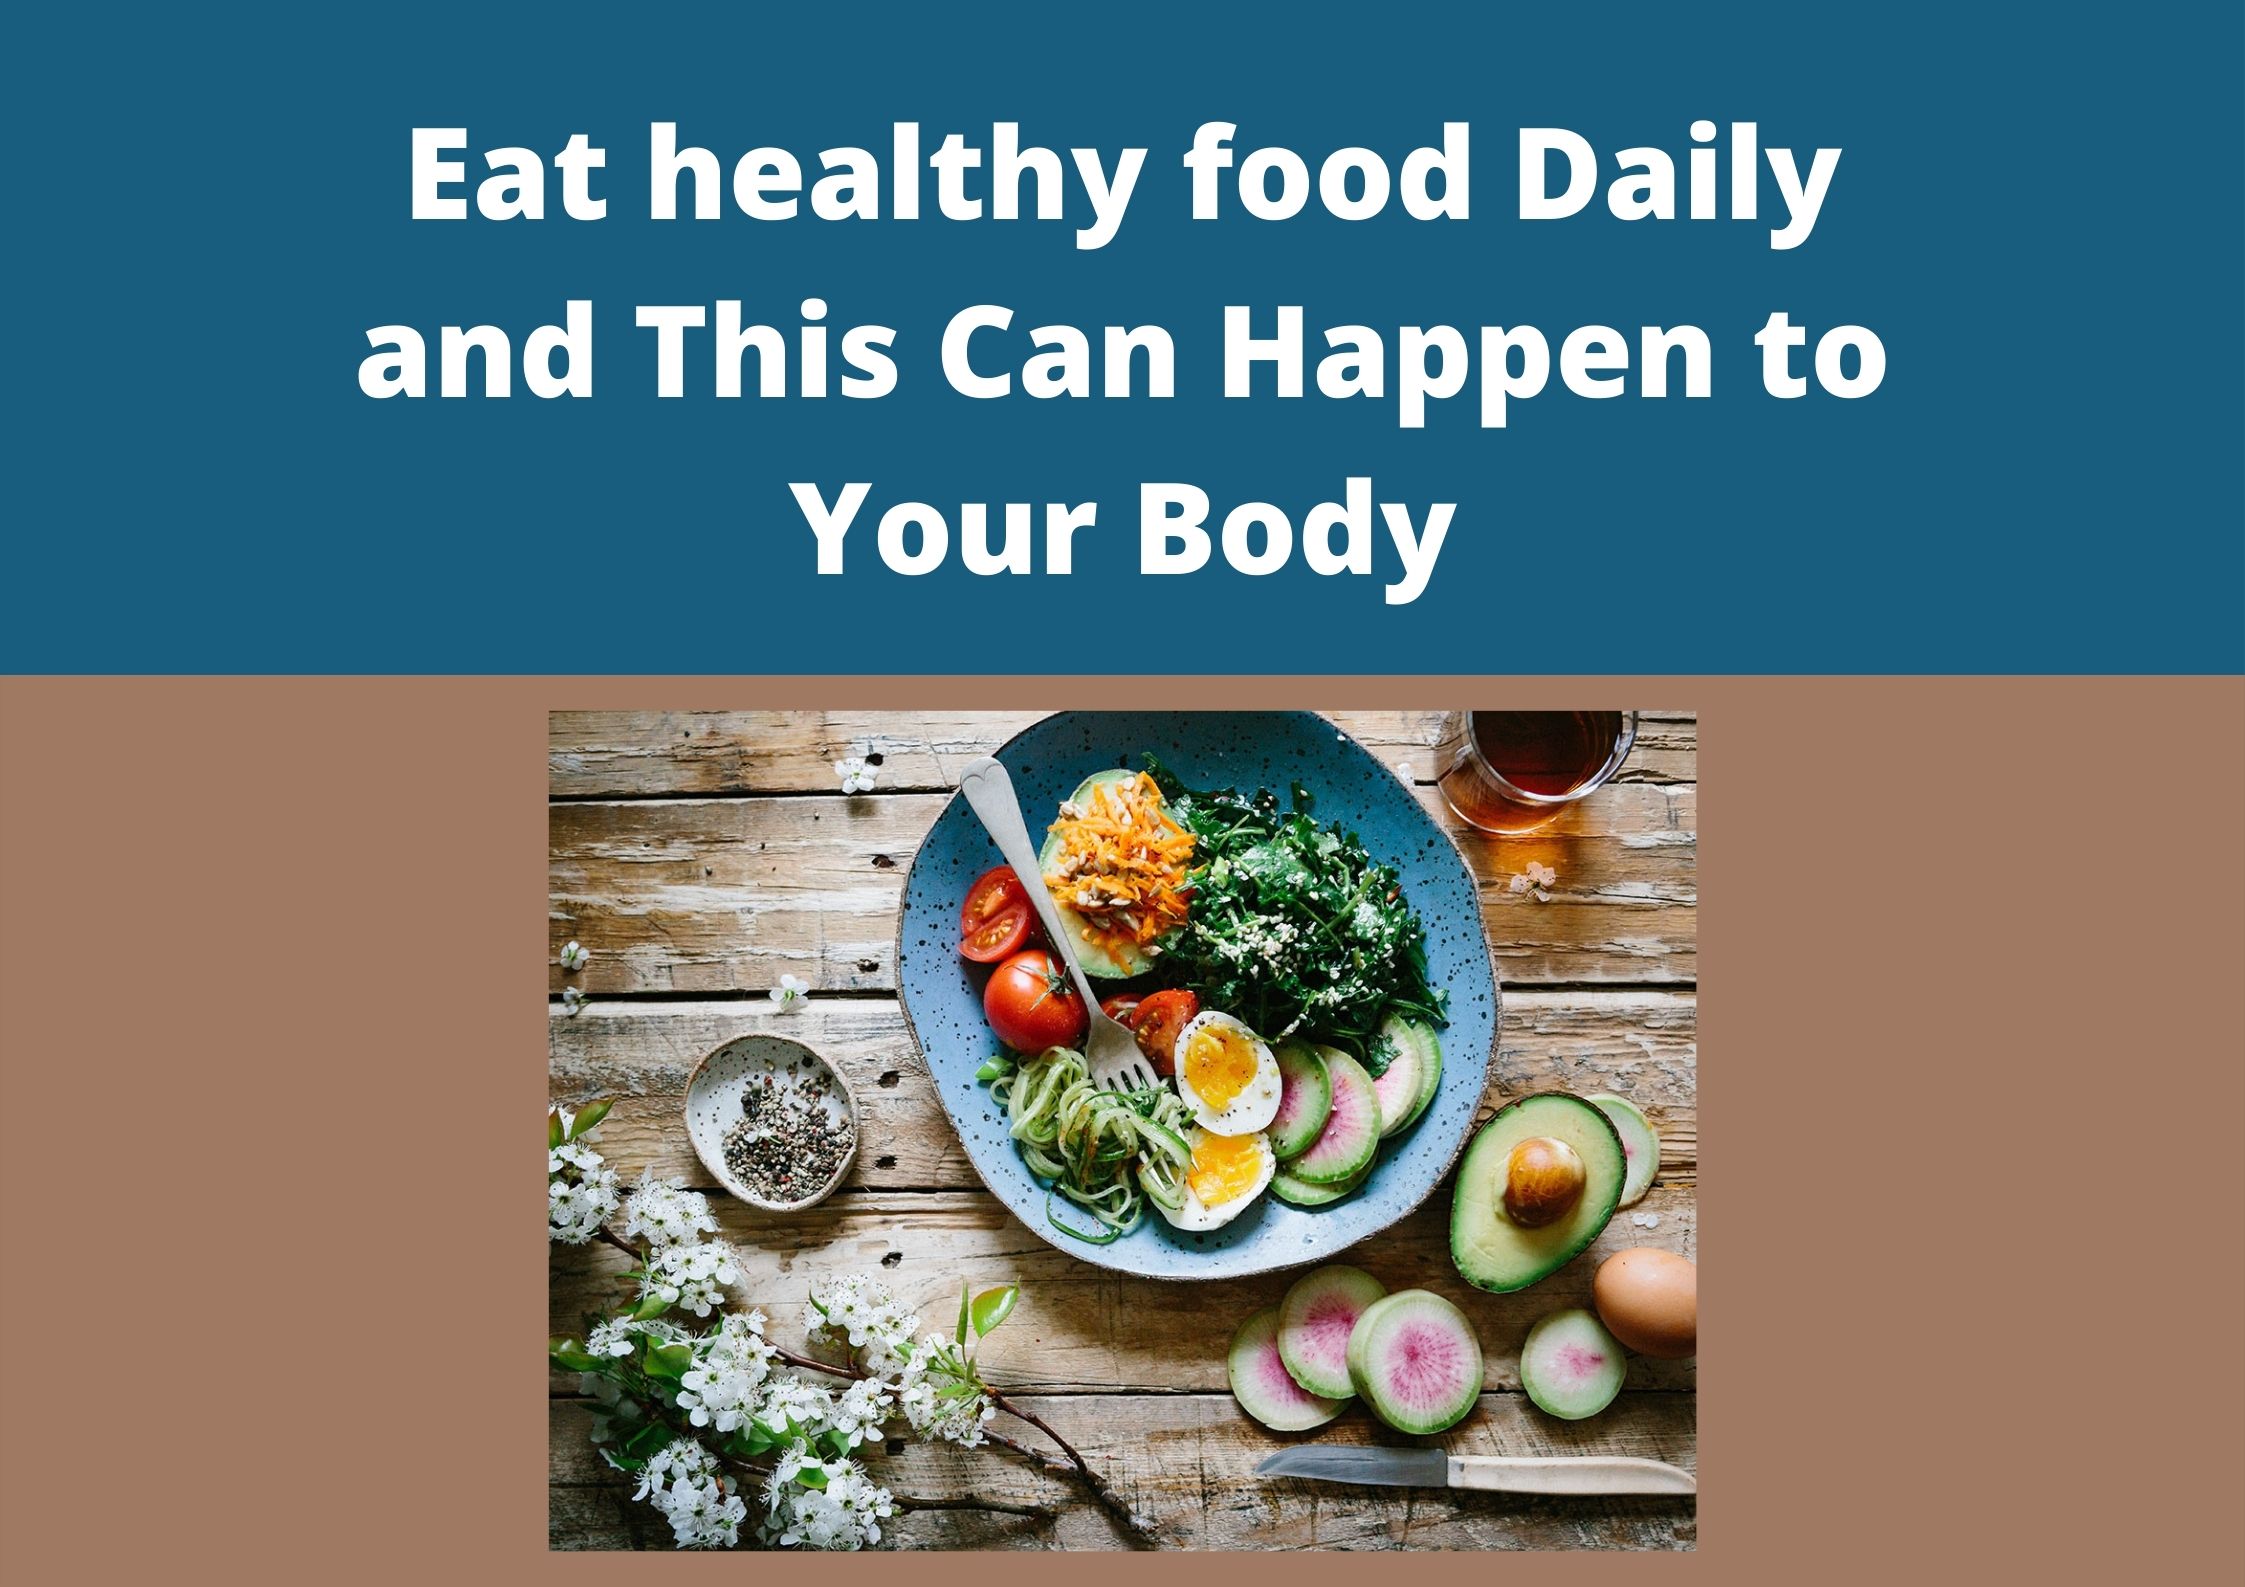 Eat healthy food Daily and This Can Happen to Your Body